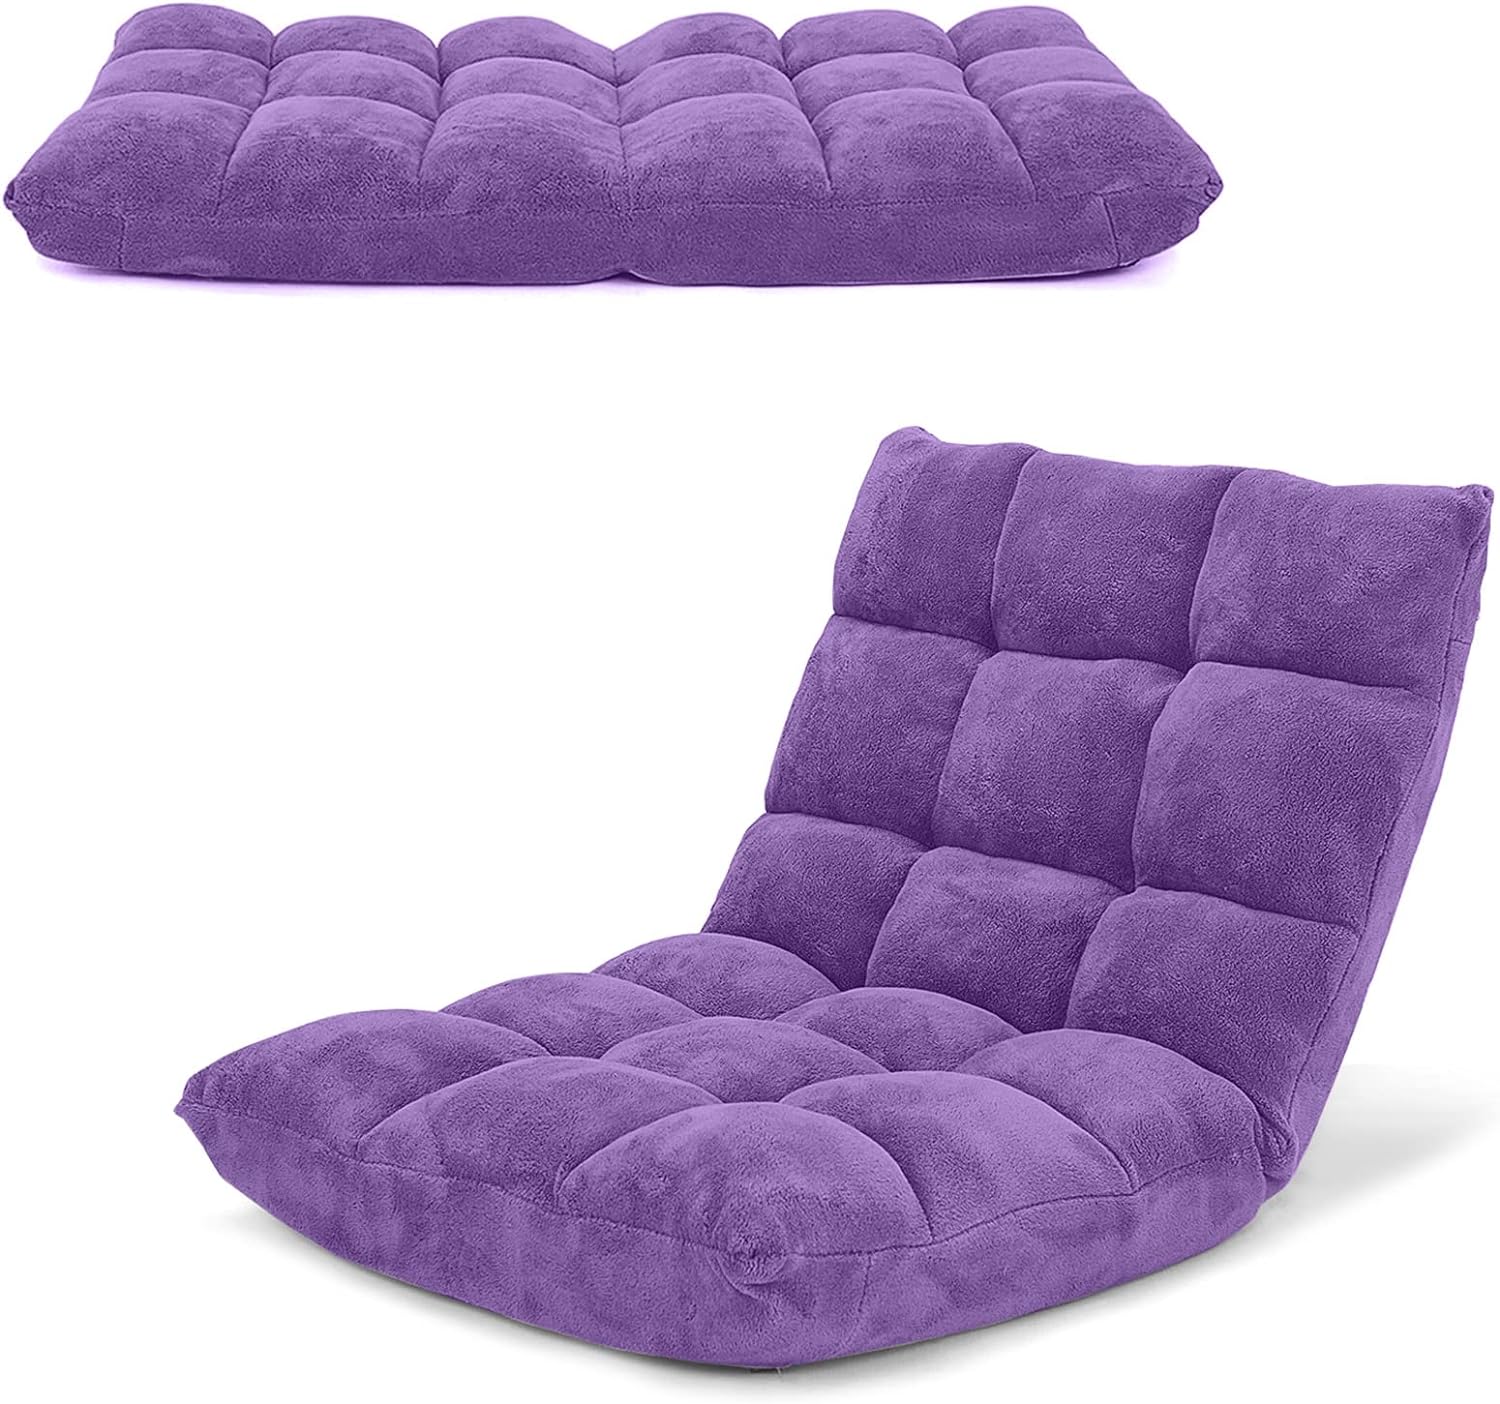 COSTWAY Adjustable Gaming Chair, Purple, 14-Position Back Support, Soft Coral Fleece, Portable, Lightweight, 22 x 24 x 22